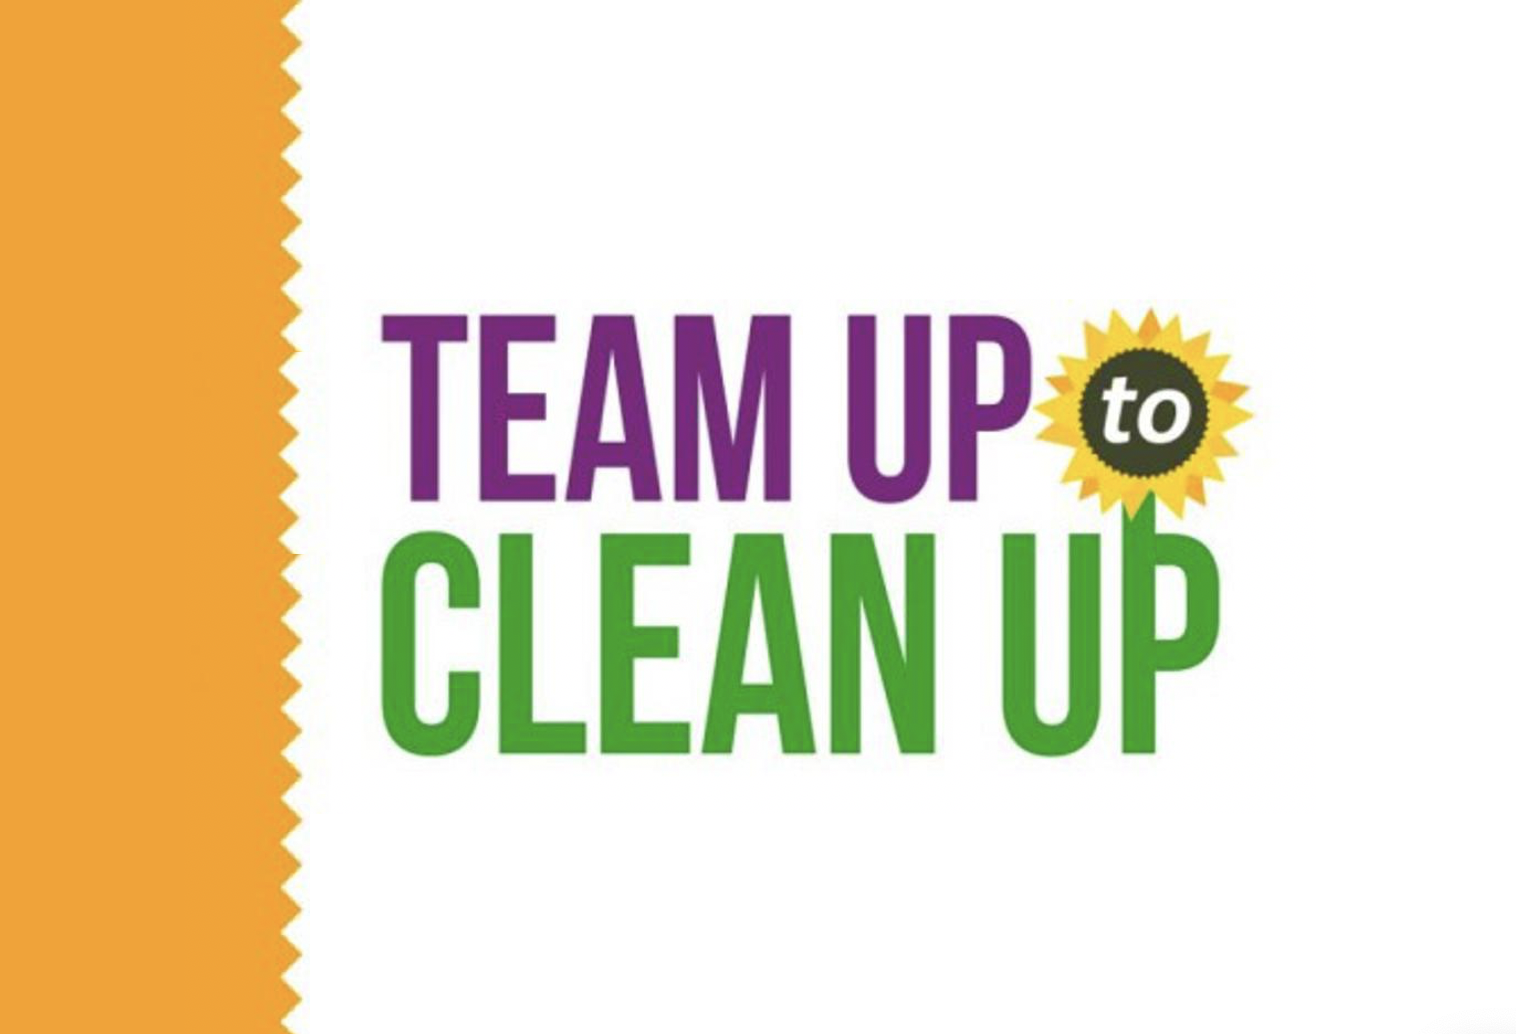 Team Up to Clean Up